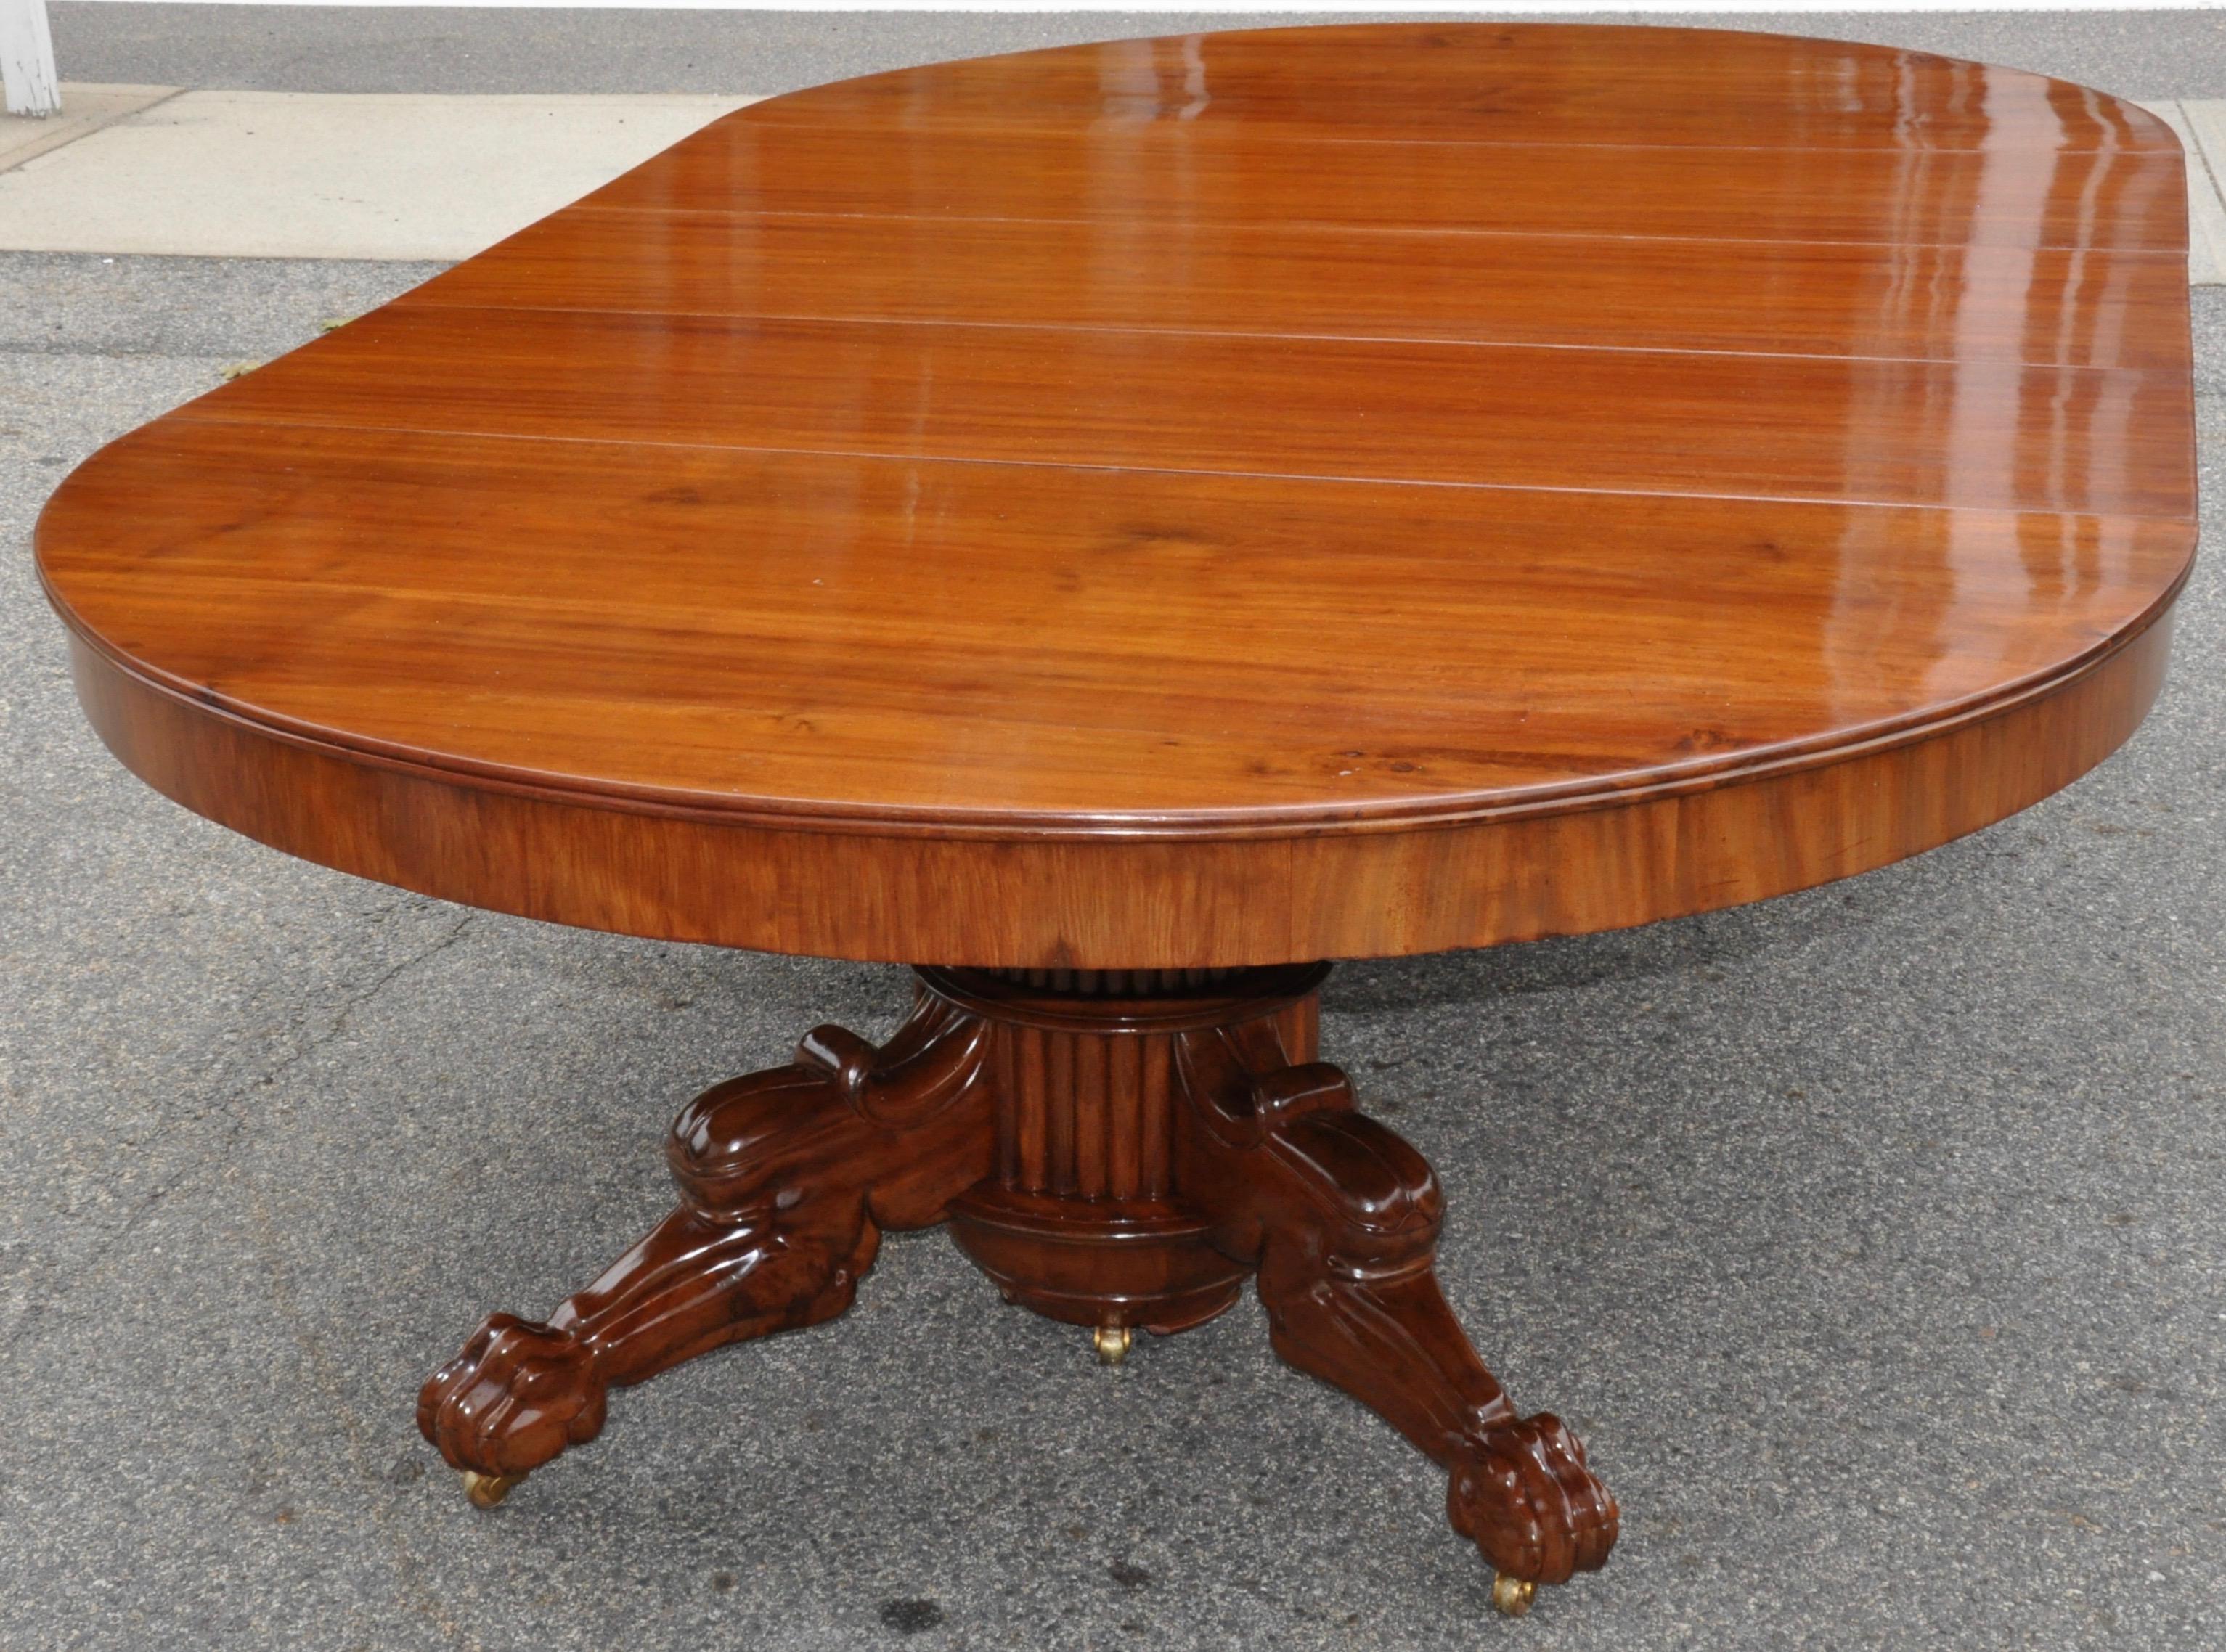 Period Early 19th Century Neoclassical Walnut Round Expanding Dining Table 1